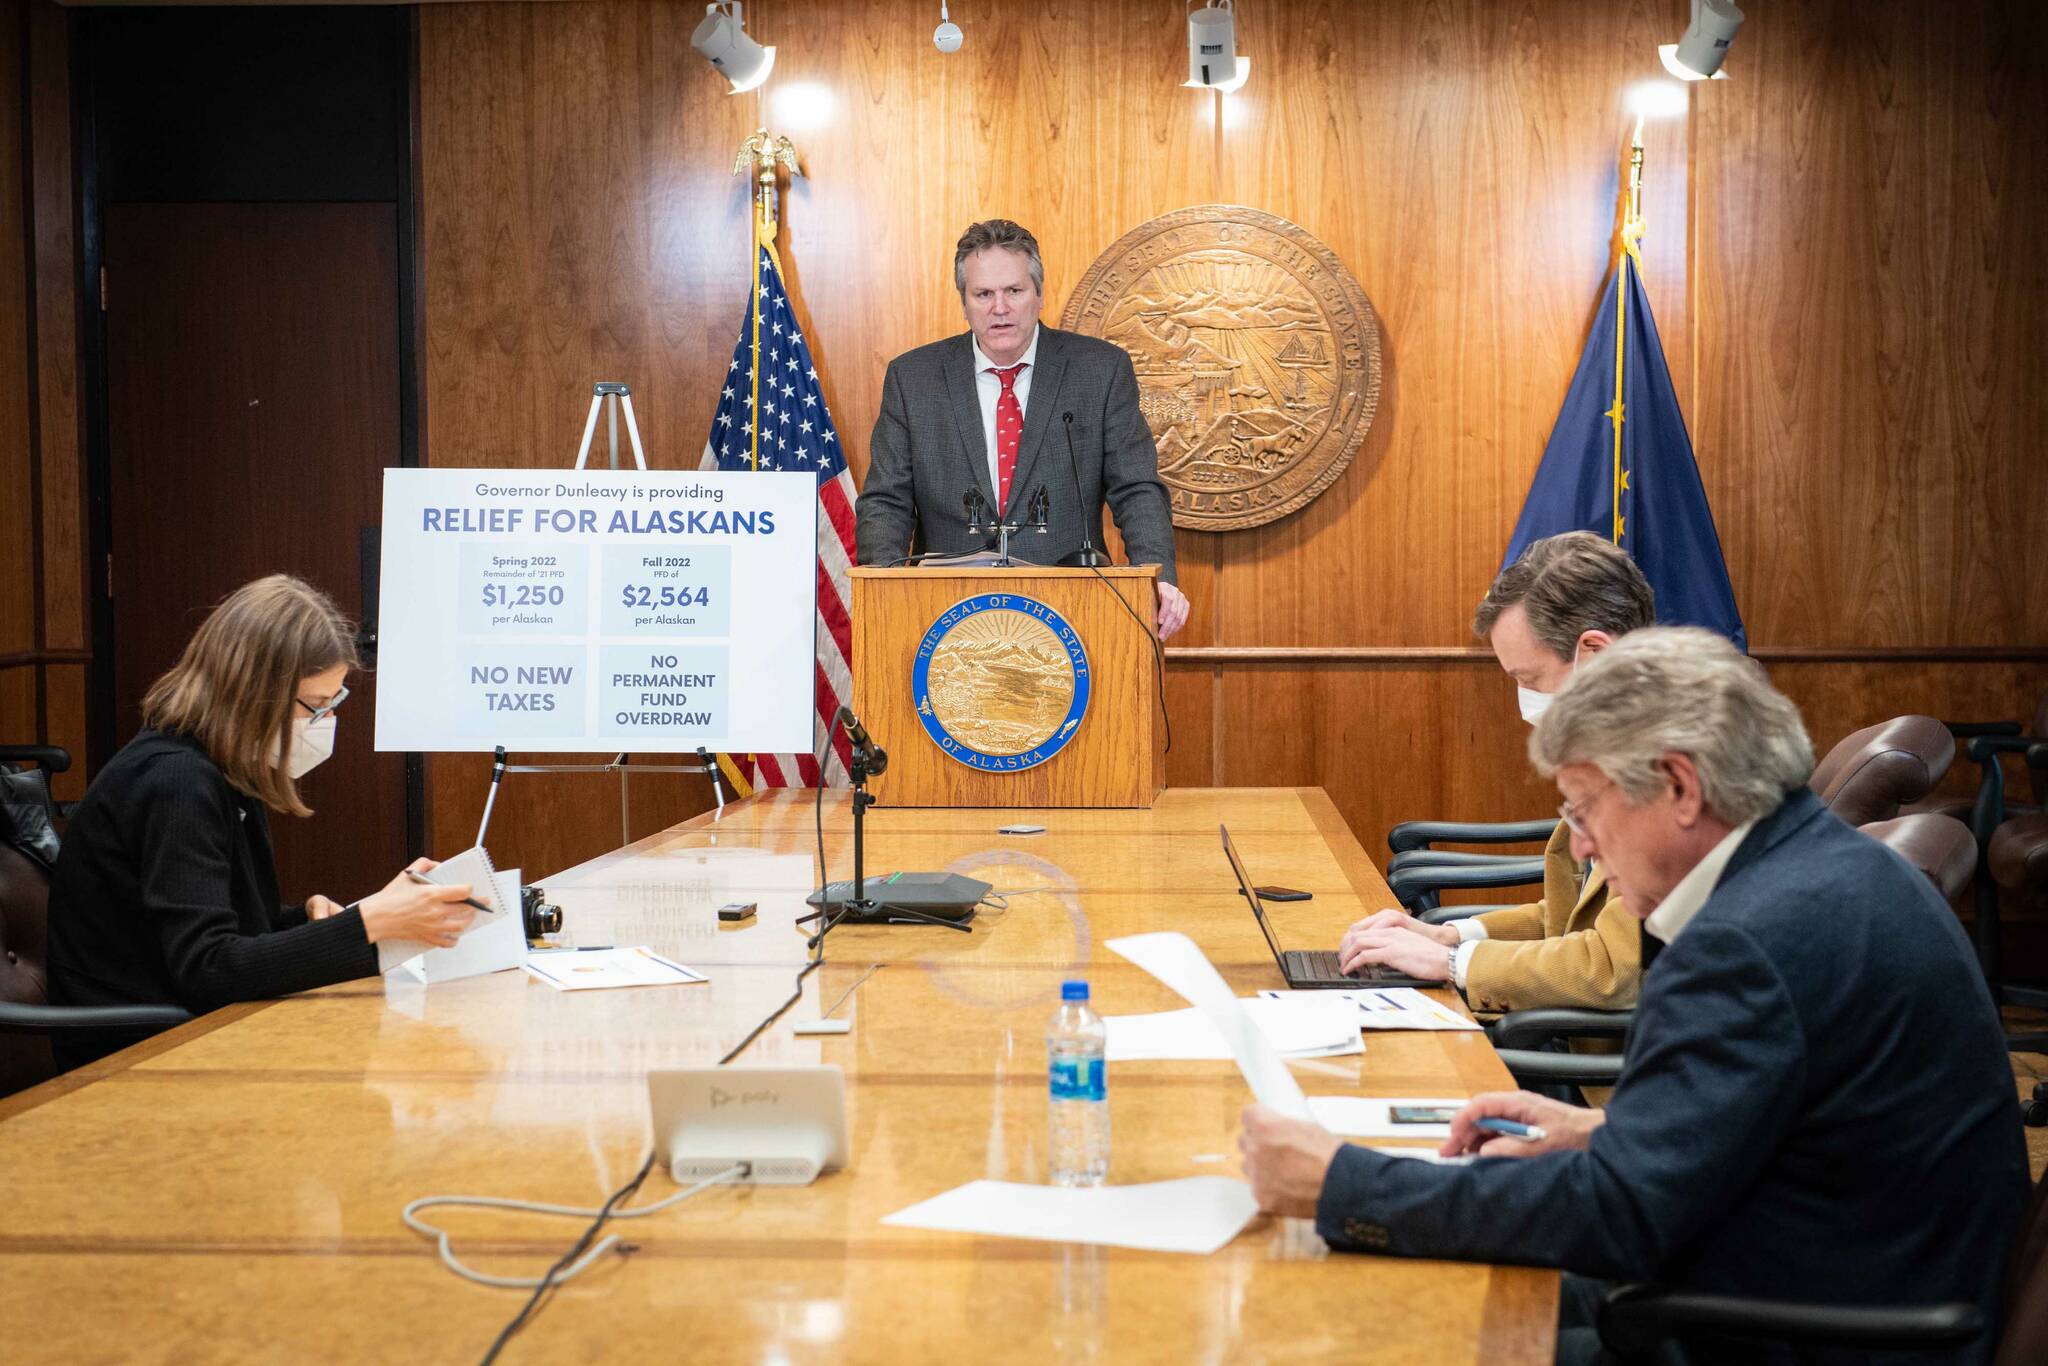 Gov. Mike Dunleavy speaks during a press conference on Thursday in Juneau. (Photo courtesy Kevin Goodman, Office of the Governor)